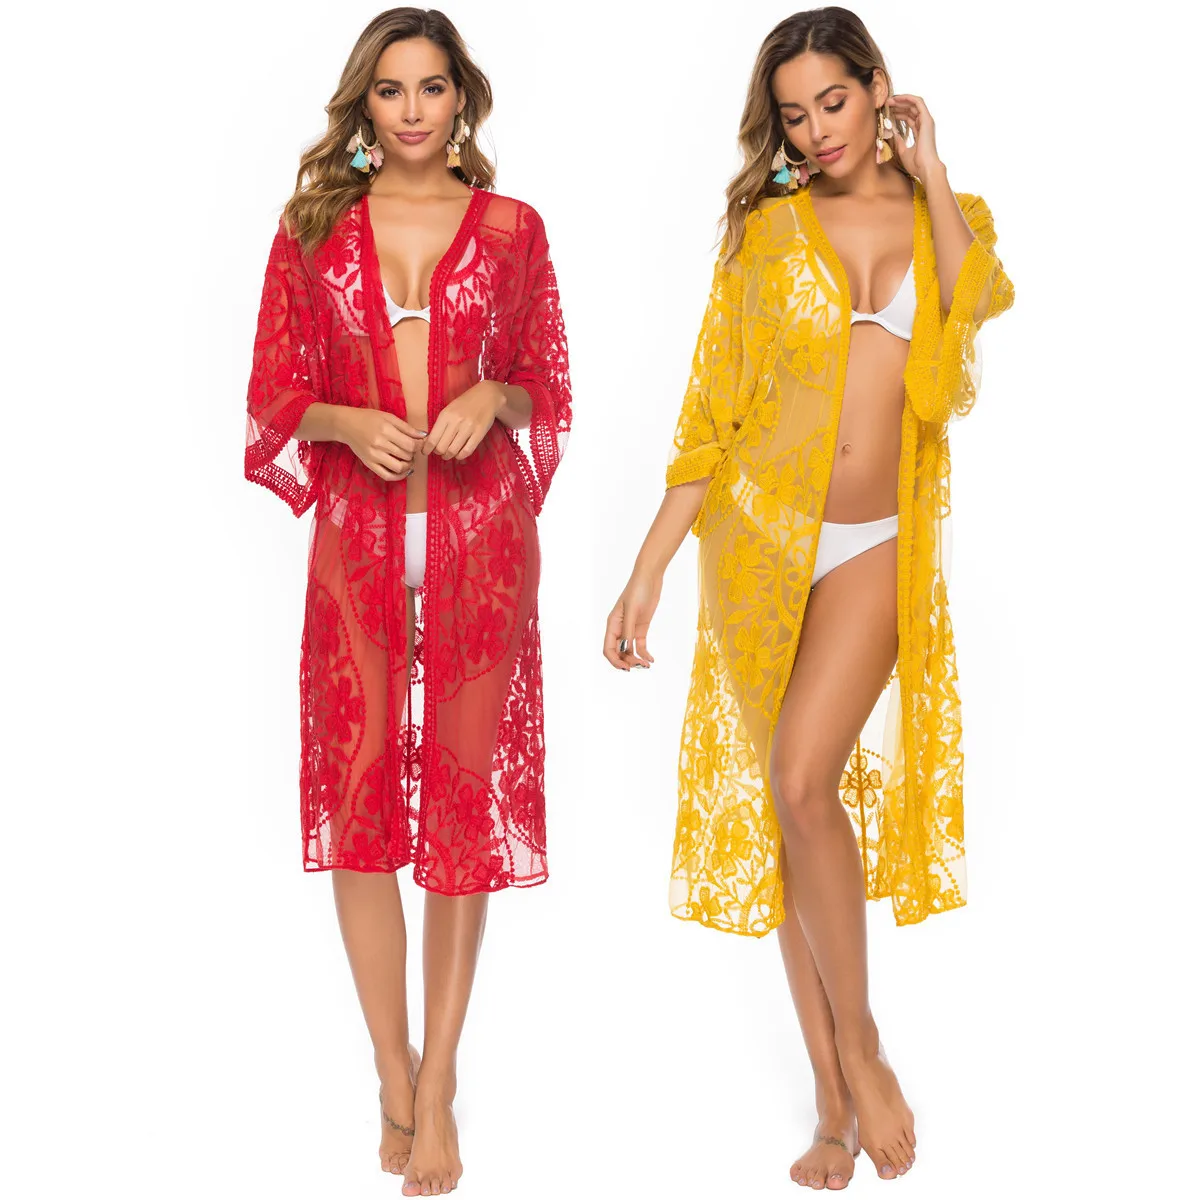 bathing suit with matching cover up Women Summer Lace Beach Bikini Chiffon Cover Ups Holiday Cardigan Wrap Long Blouse bathing suit coverups